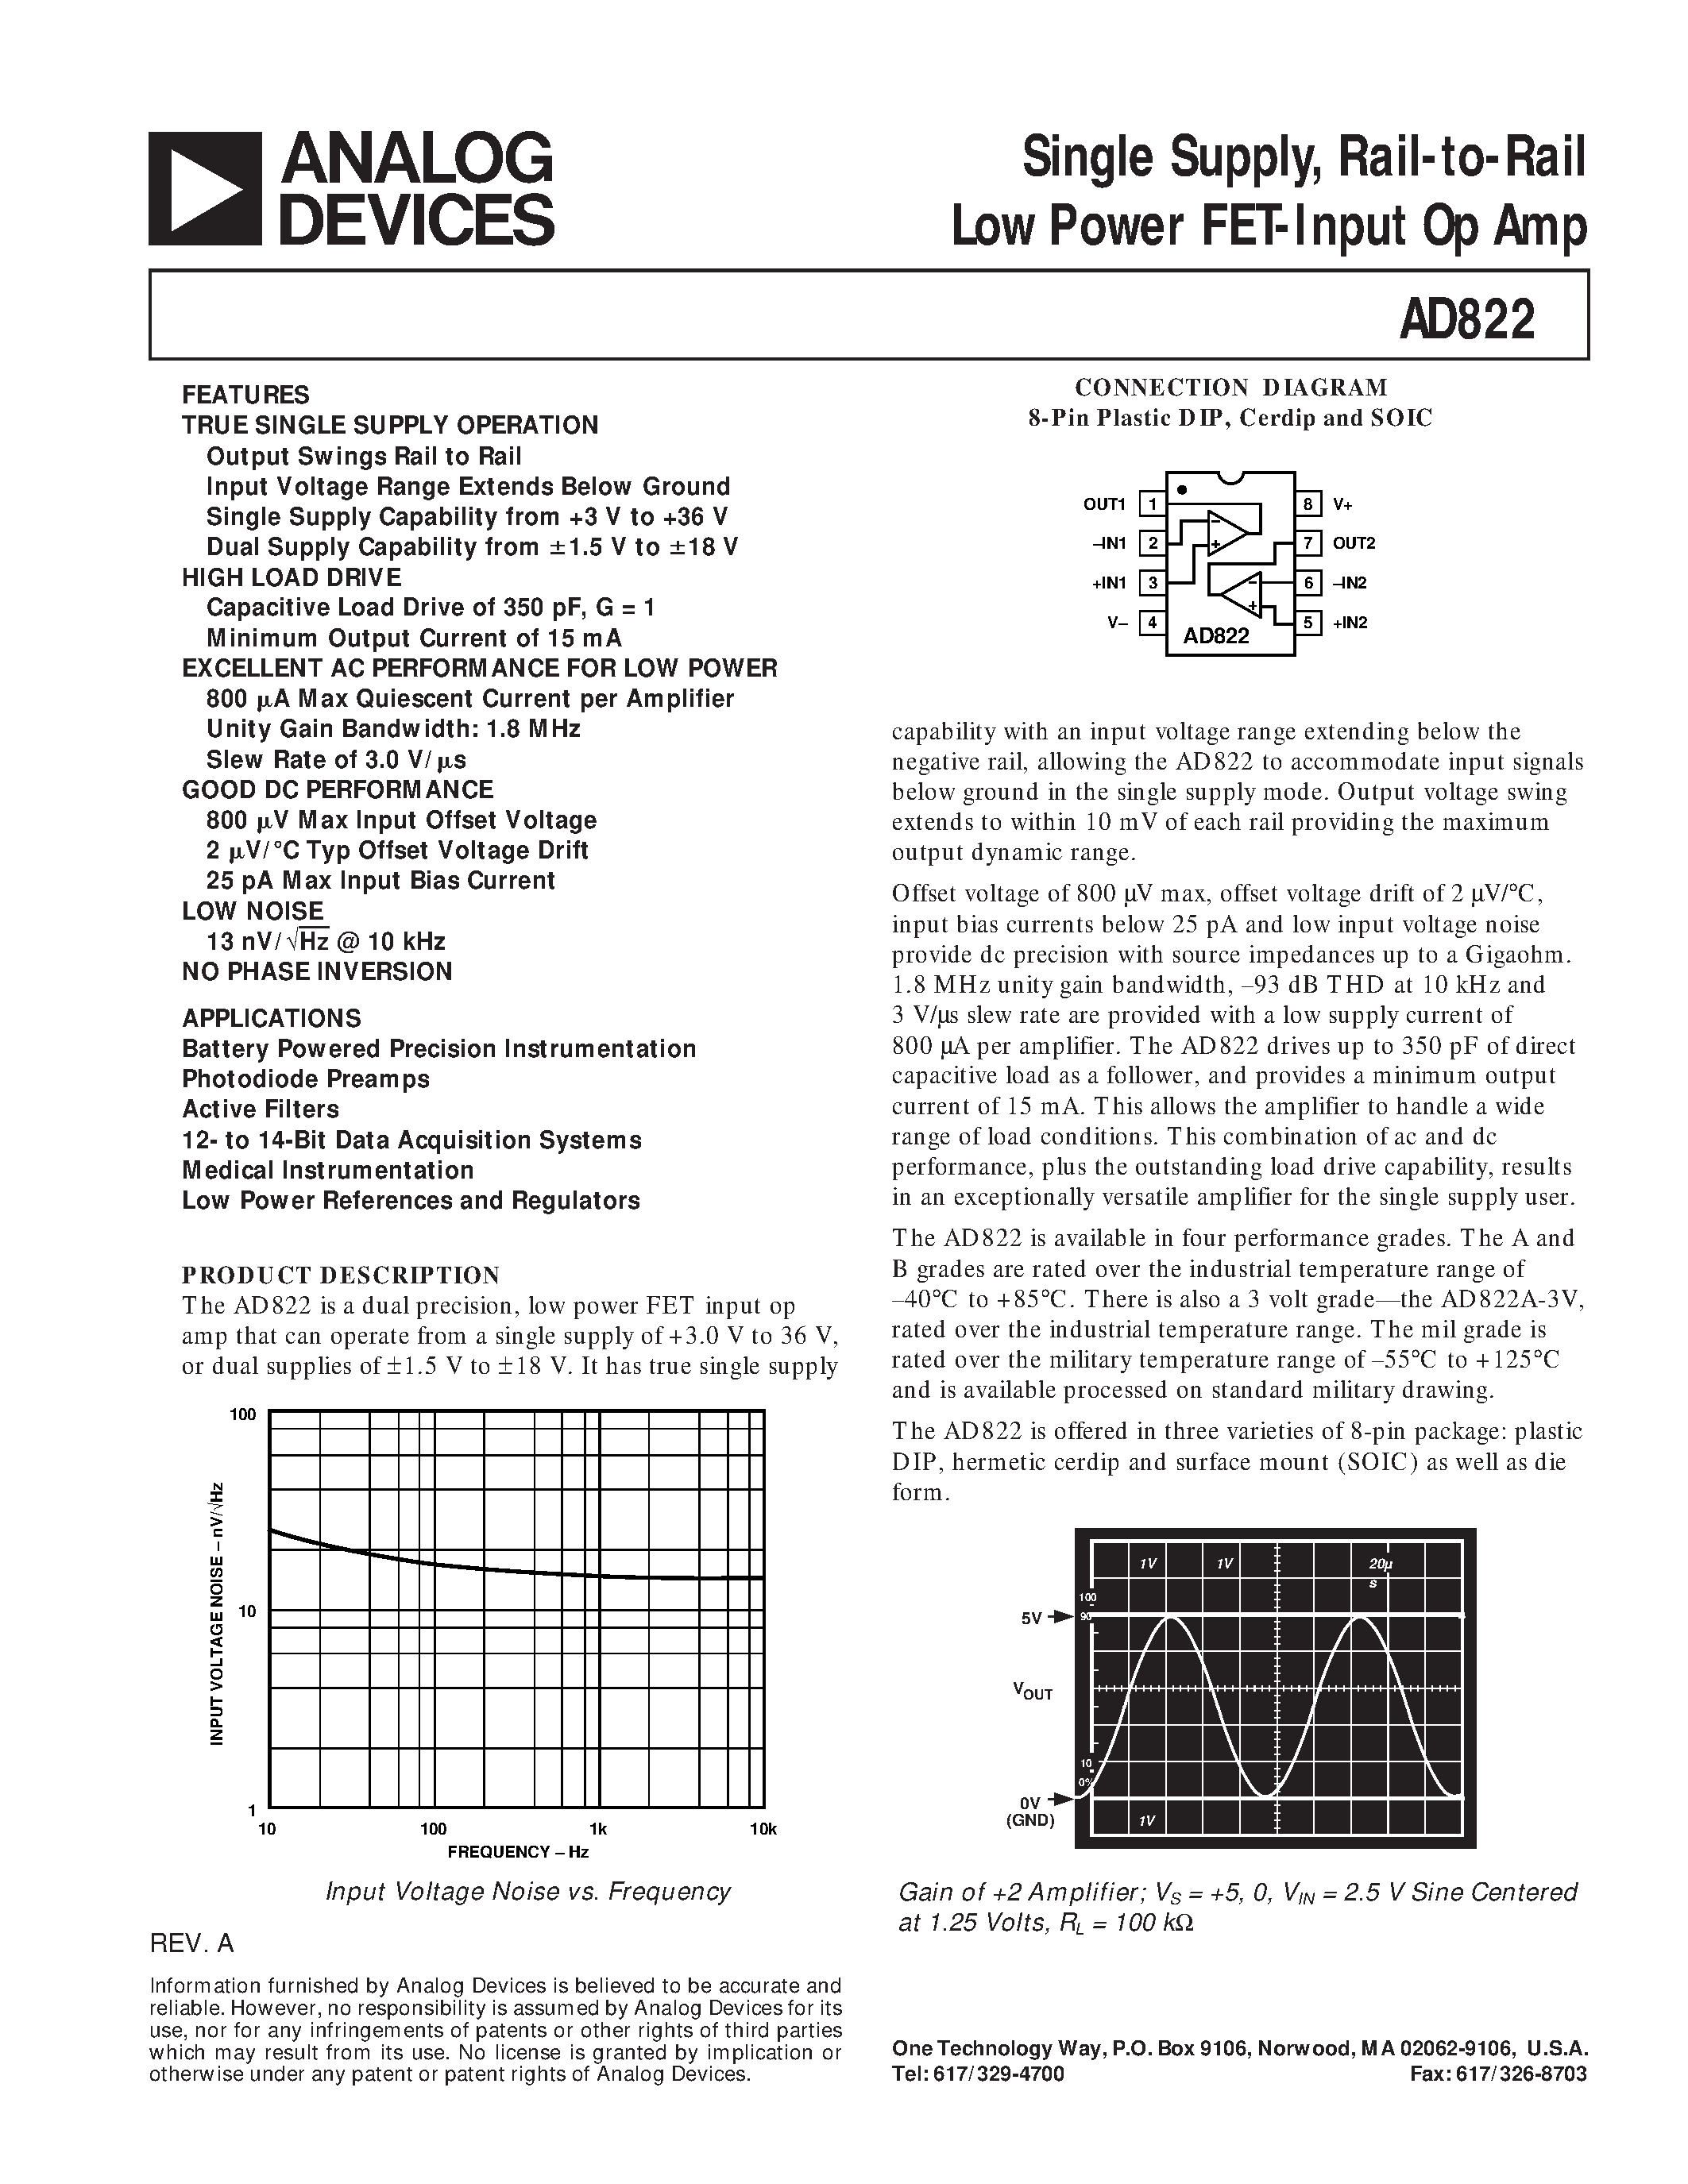 Datasheet AD822 - Single Supply/ Rail-to-Rail Low Power FET-Input Op Amp page 1